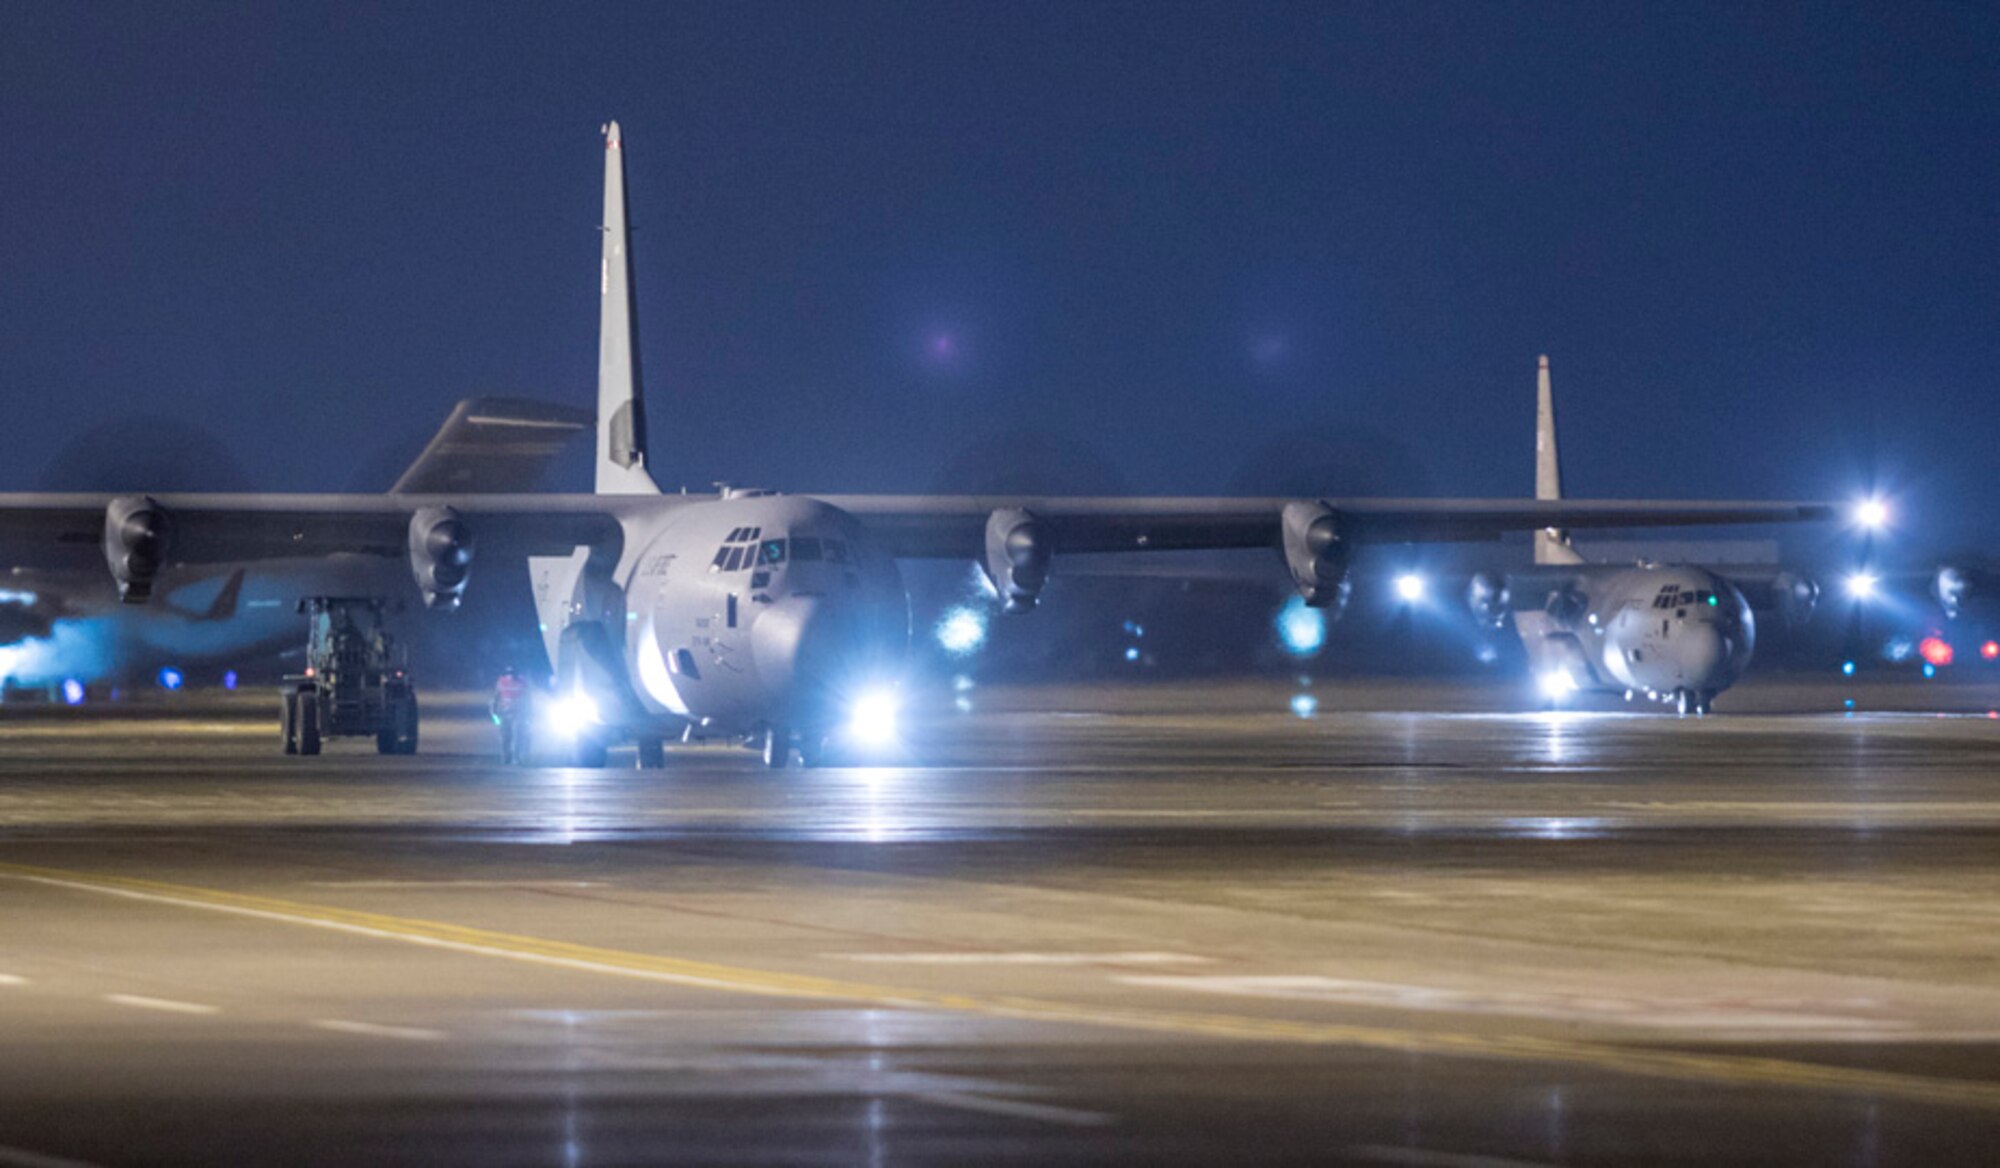 Airmen with the 374th Logistics Readiness Squadron combat mobility flight perform offloading a cargo from a C-130J Super Hercules while engine running operation (ERO)